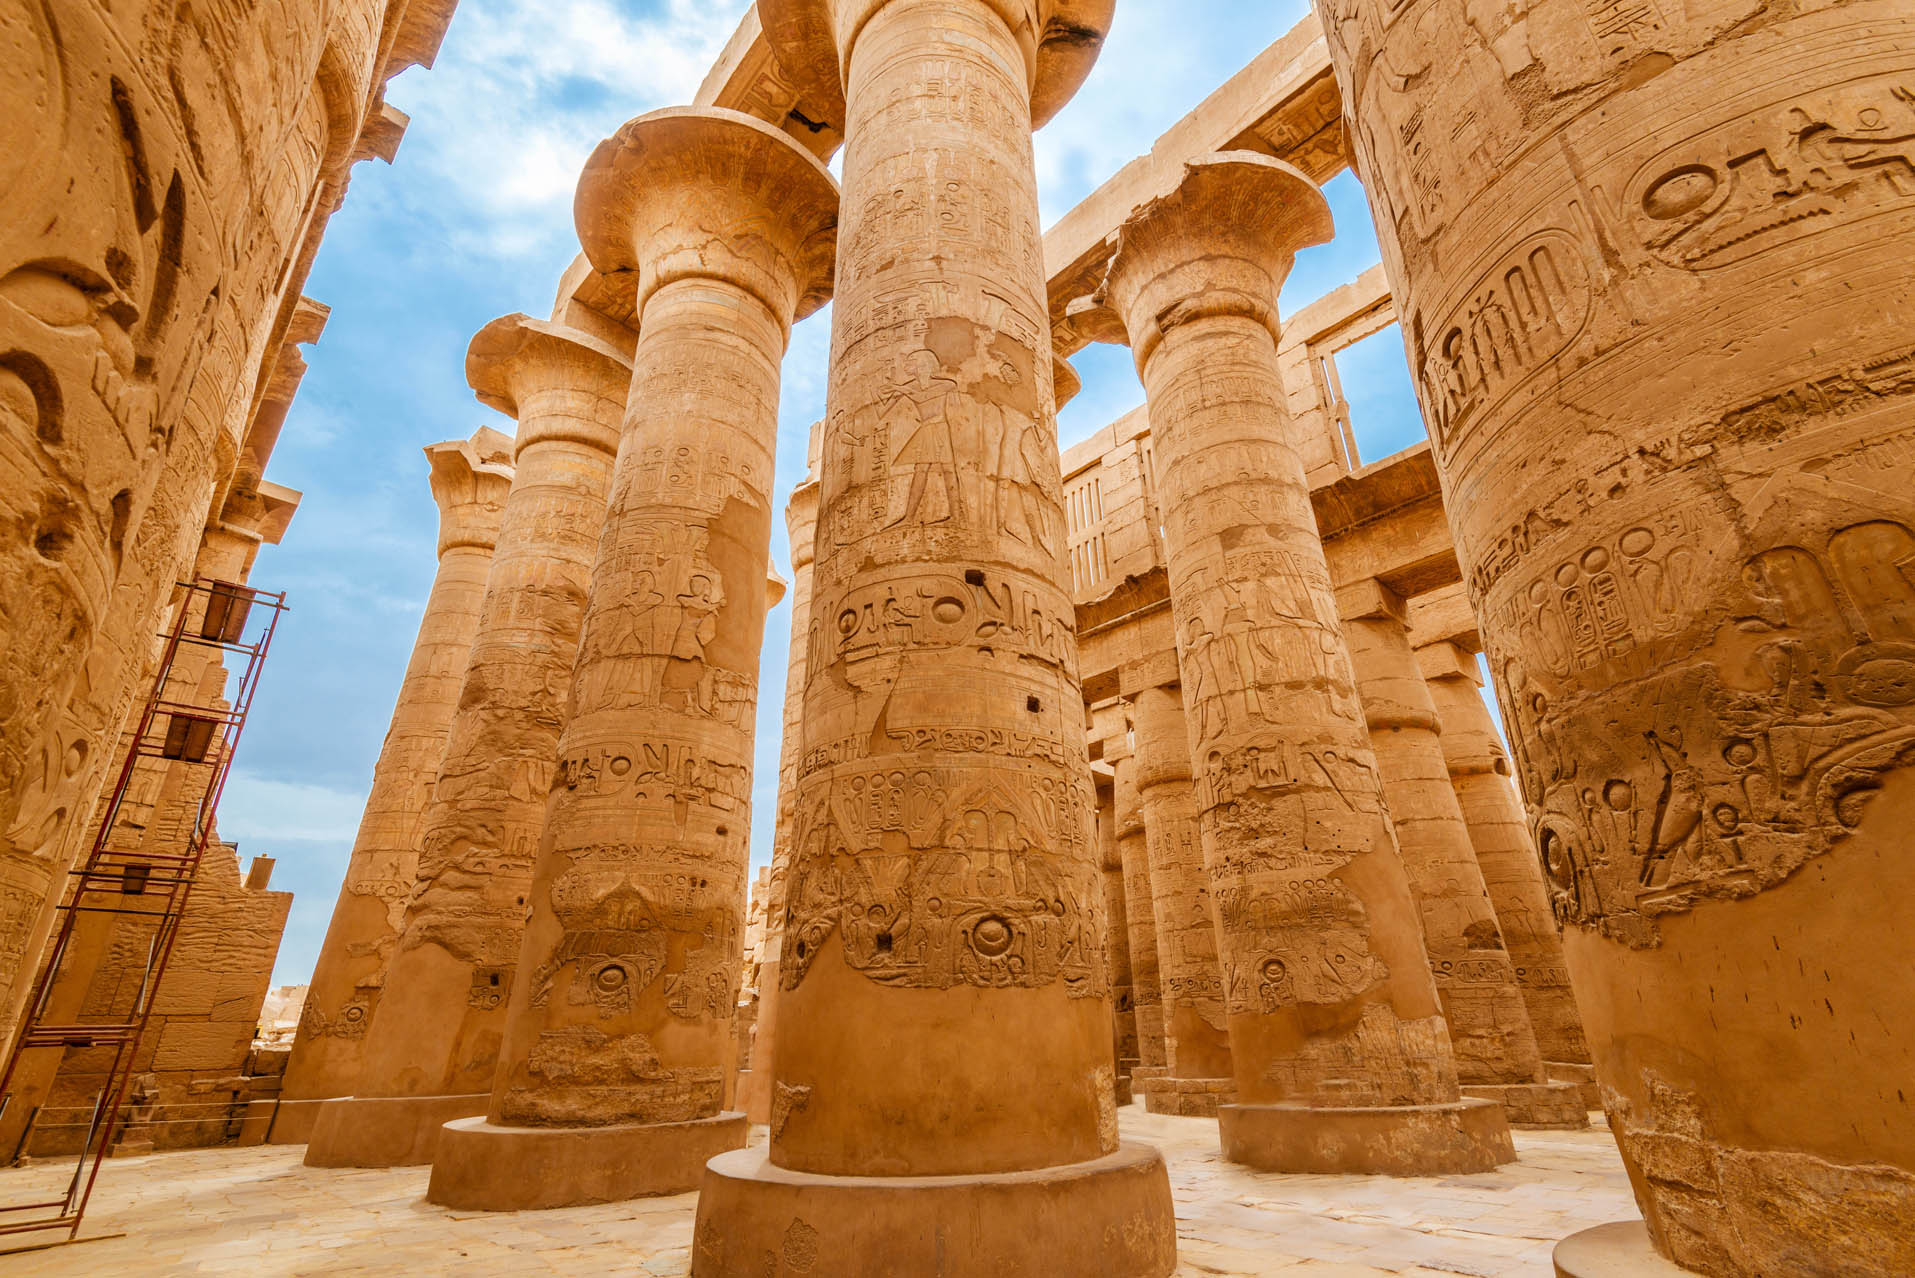 Private Tour of Luxor and the Temple of Karnak